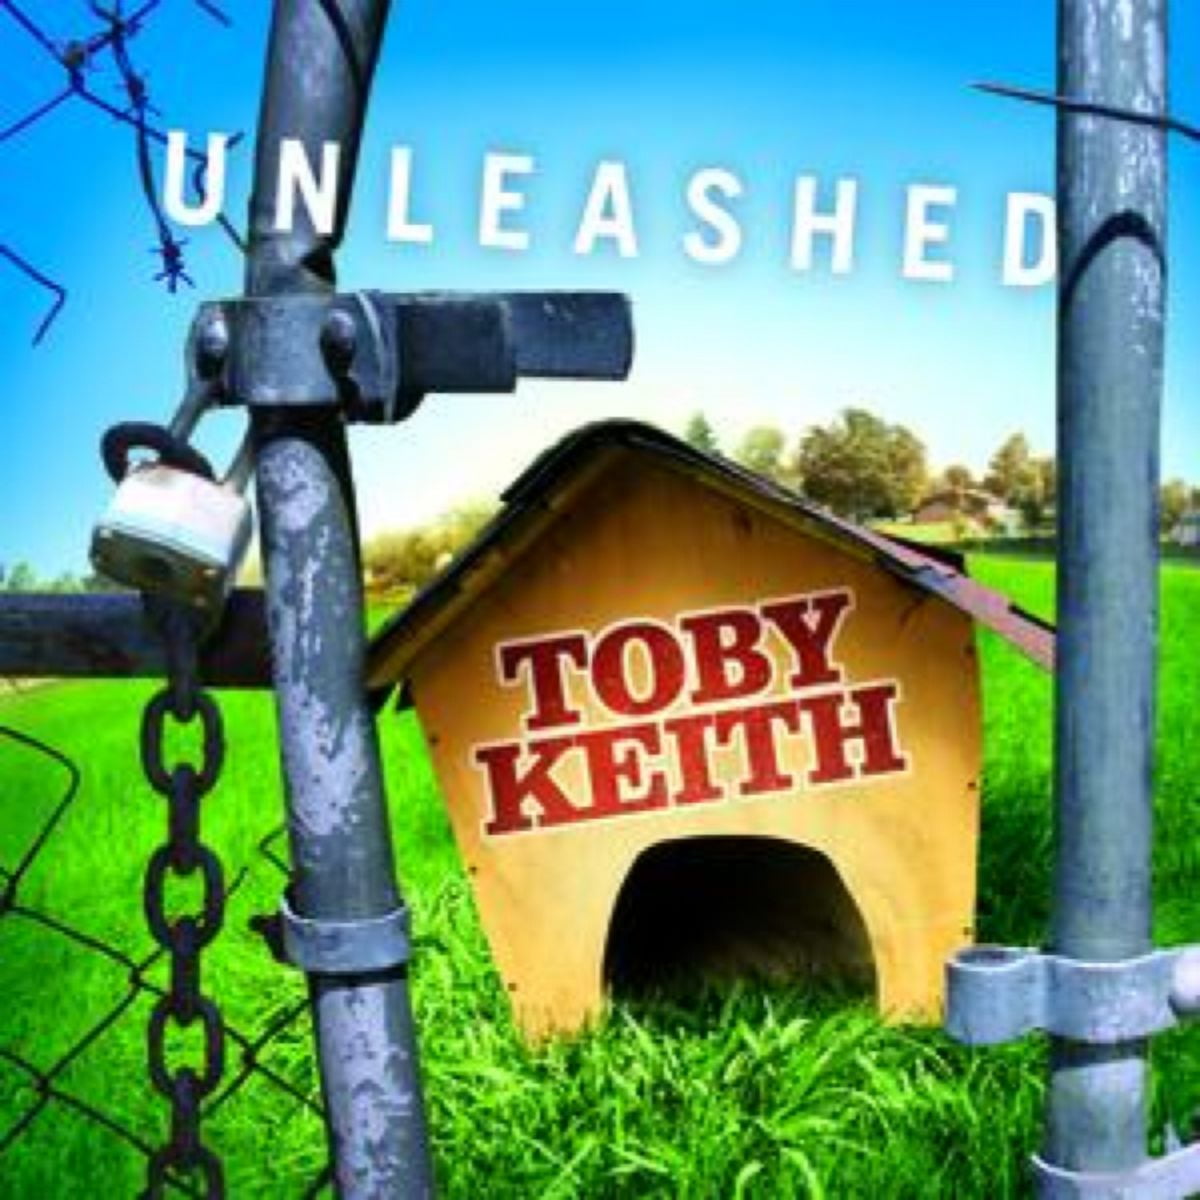 Pre-Owned Toby Keith - Unleashed (Cd) (Good) - Walmart.com